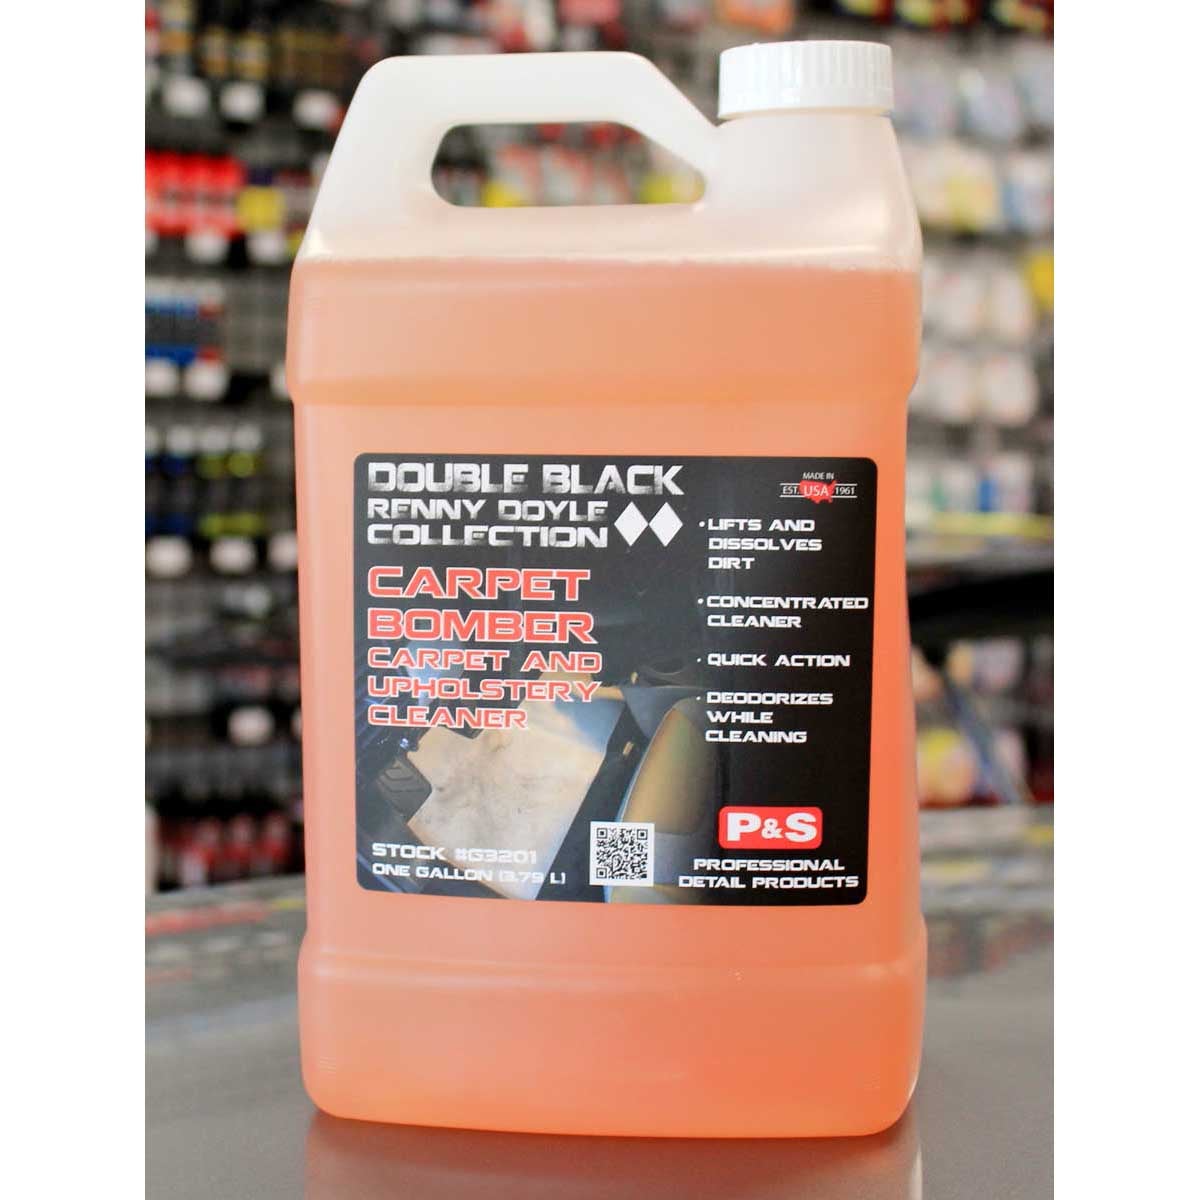 P&S Professional Detail Products - Carpet Bomber - Carpet and Upholstery  Cleaner; Citrus Based Cleaner Dissolves Grease and Lifts Dirt; Dilutable;